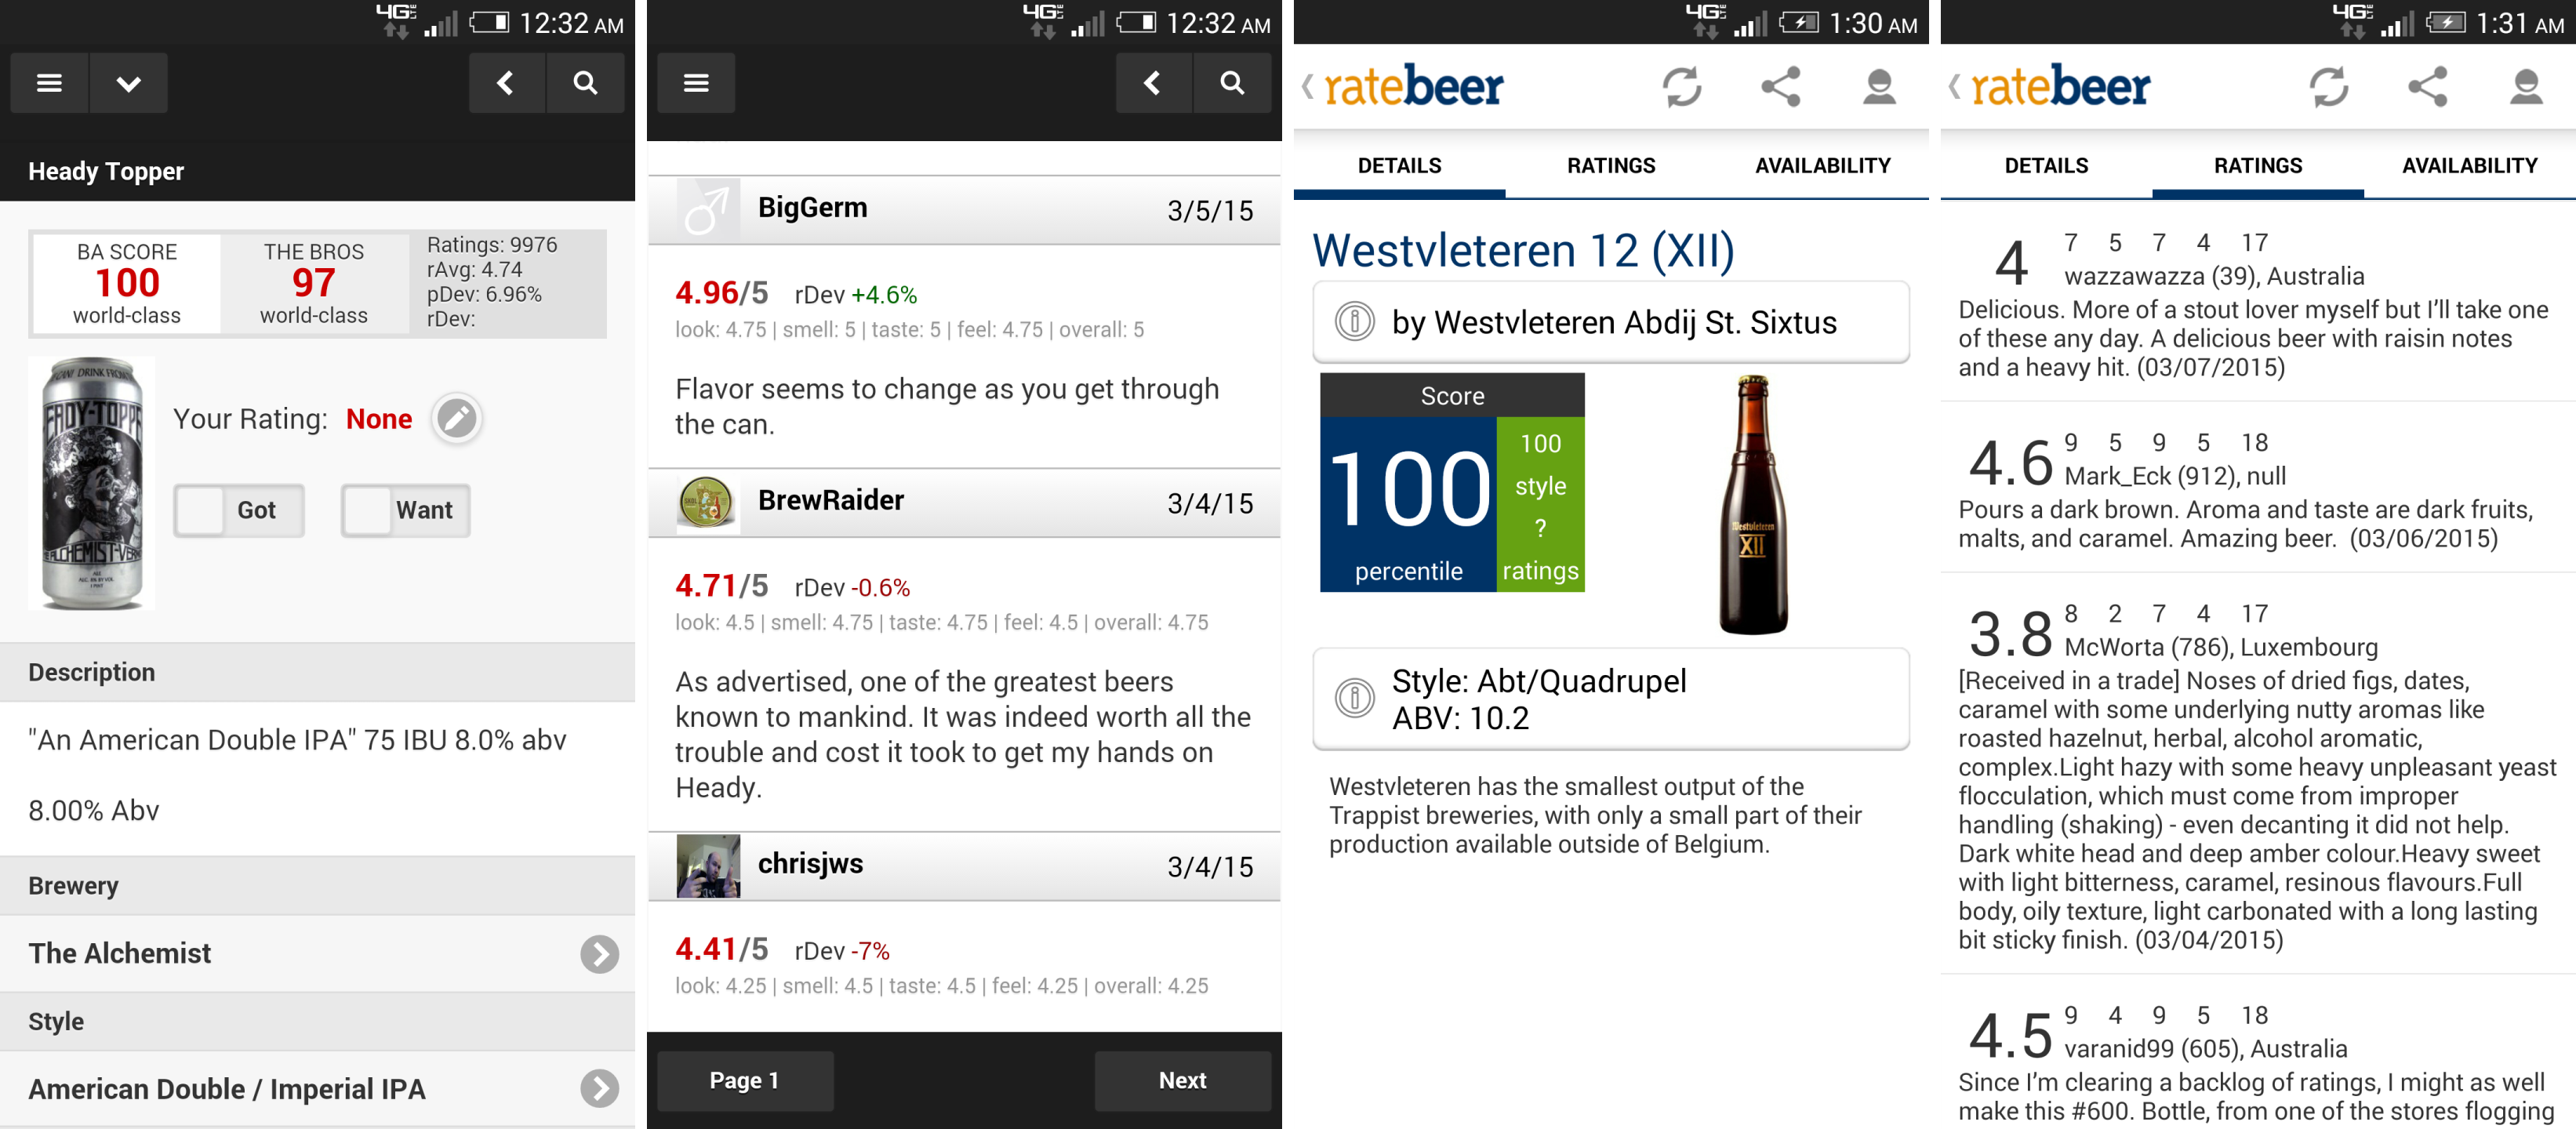 Viewing the beers and the ratings on each app